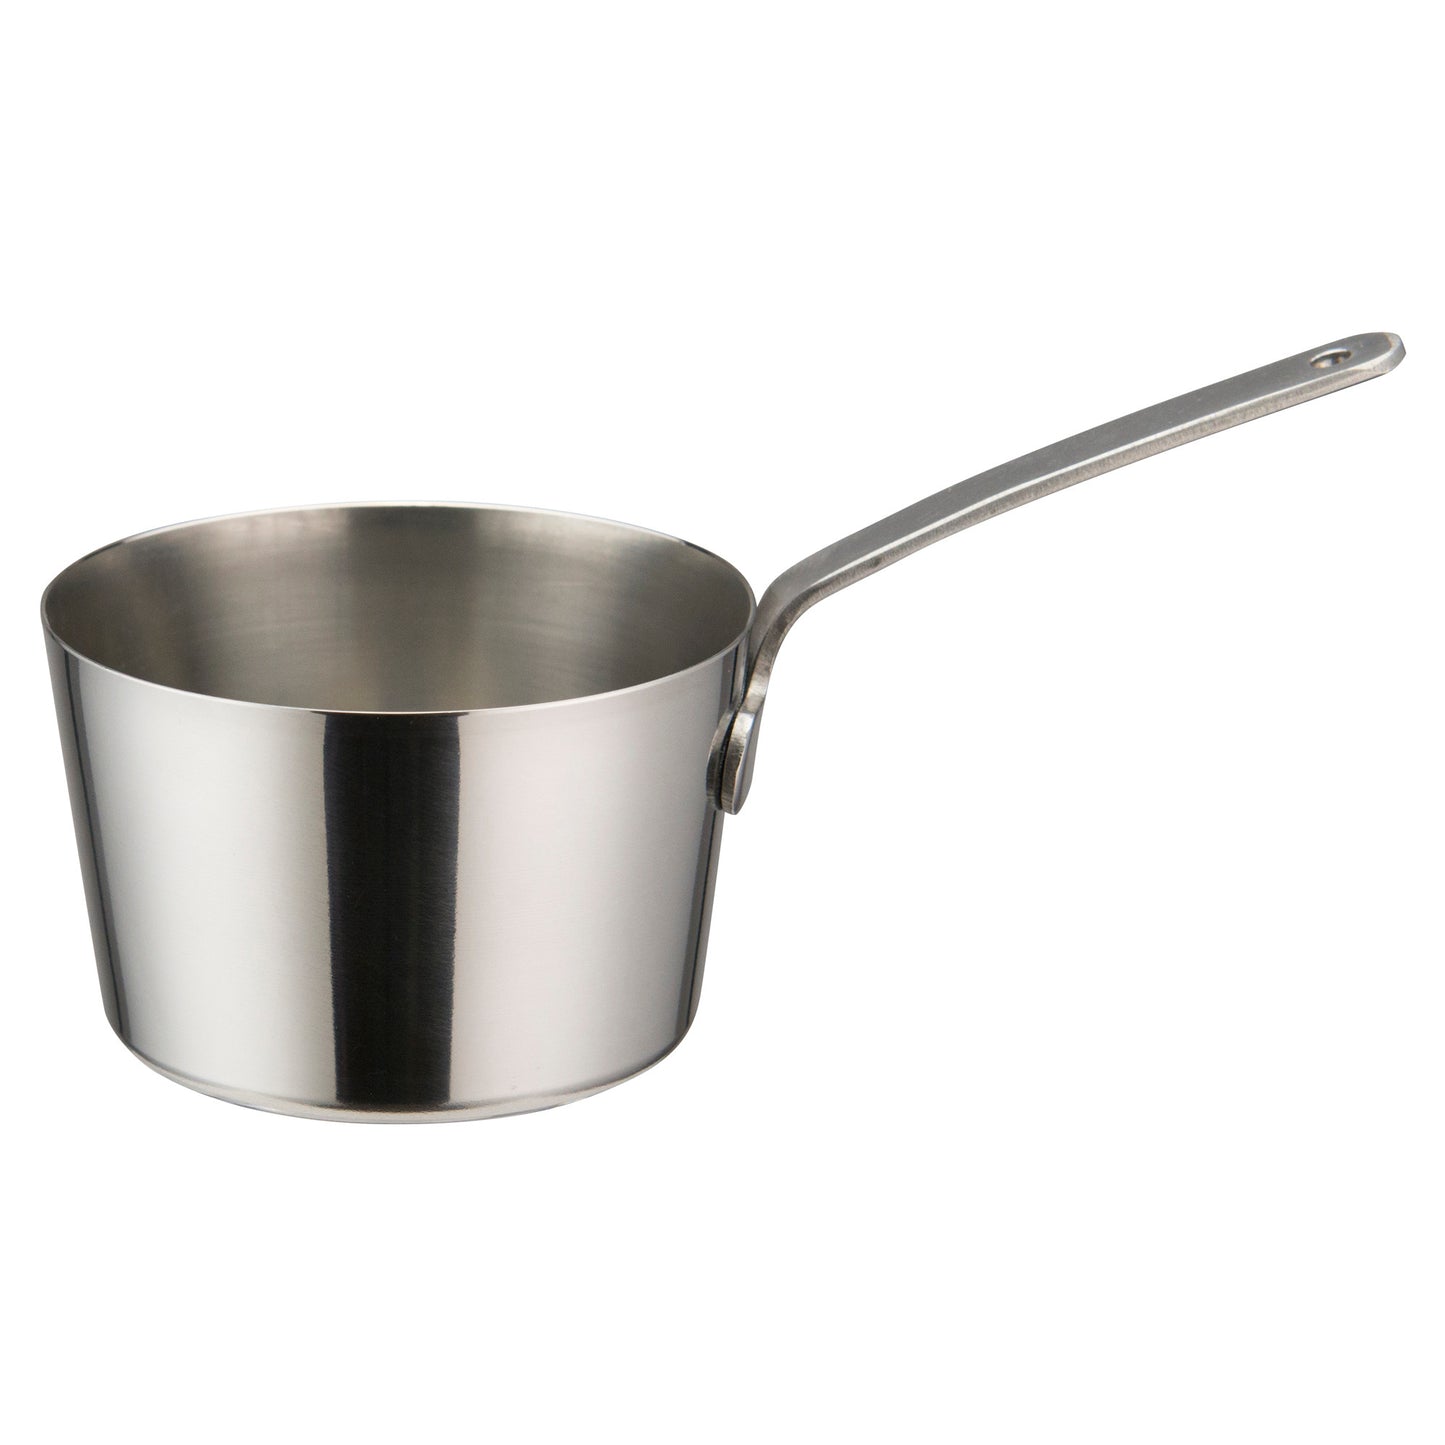 DCWB-101S - Mini Tapered Sauce Pan, Stainless Steel - 2-3/4"